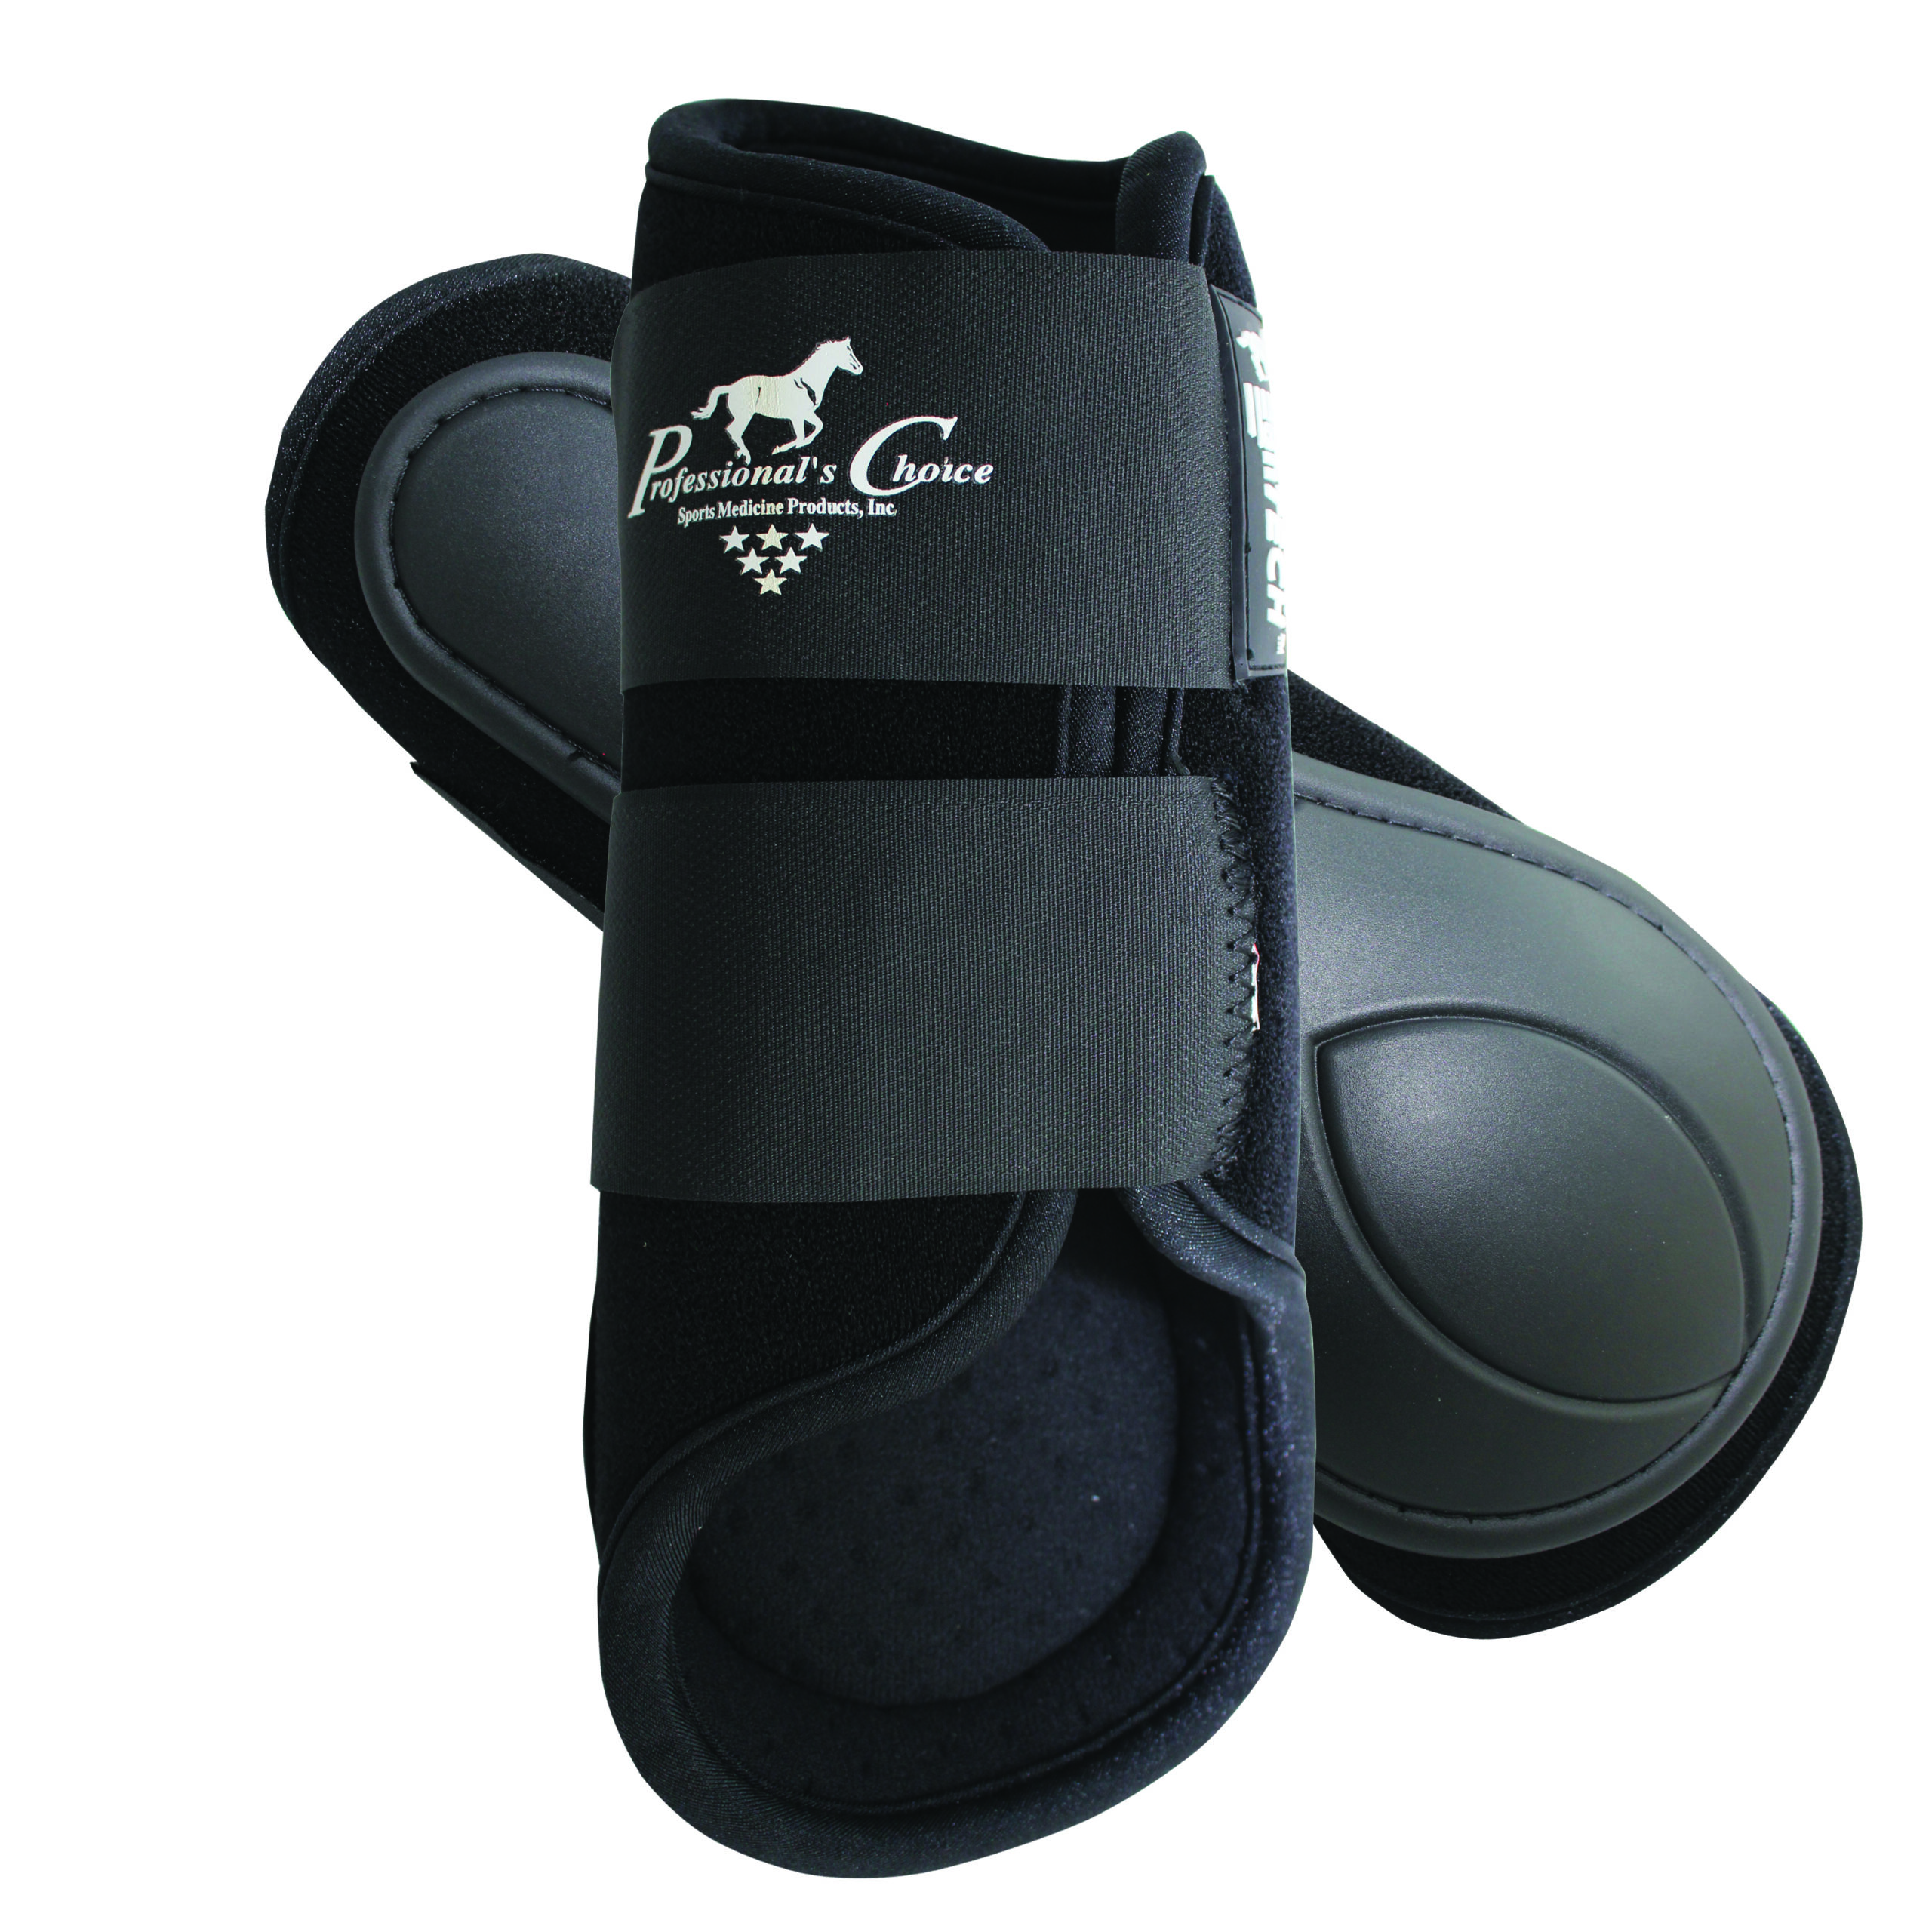 Professional's Choice Ventech Splint Boots in black with white background